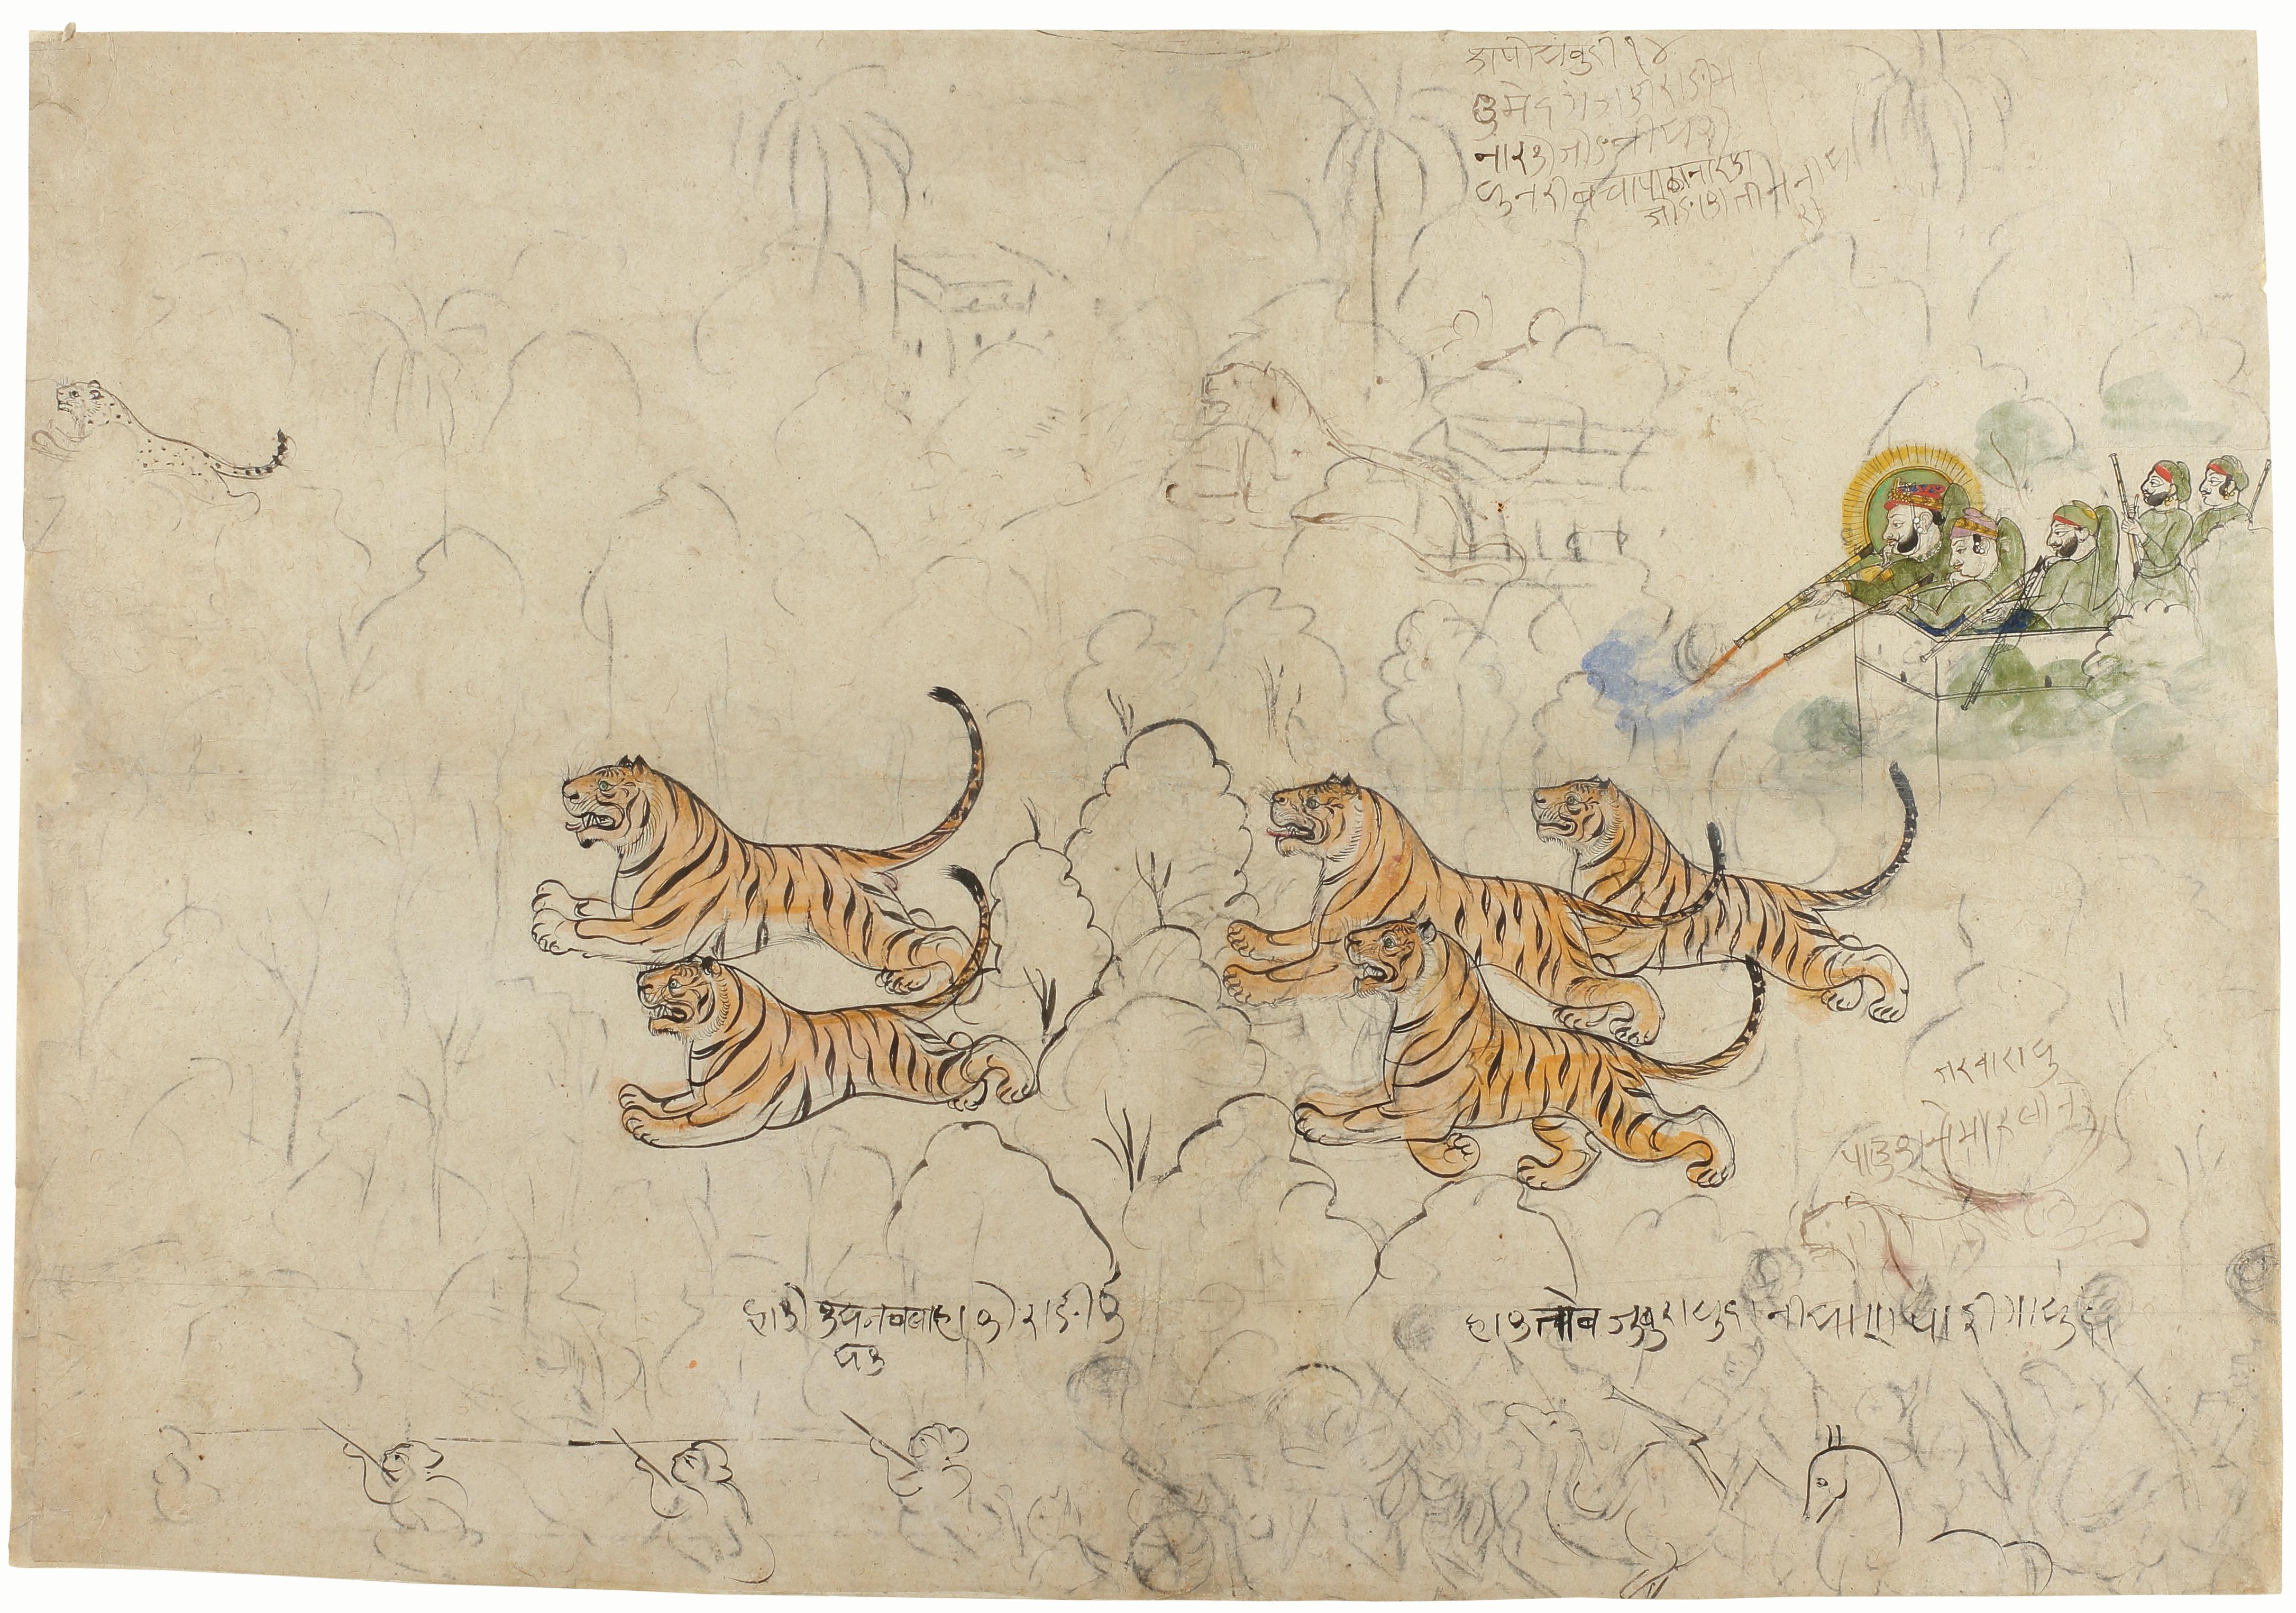 A Rare Drawing / Watercolour of Maharao Ram Singh of Kota and His Sons Hunting with numerous Rajasthani inscriptions 
Paper, Watercolour, Pencil 
India
Late 18th Century - Early 19th Century 

SIZE: 49cm high, 71cm wide - 19⅓ ins high, 28 ins wide